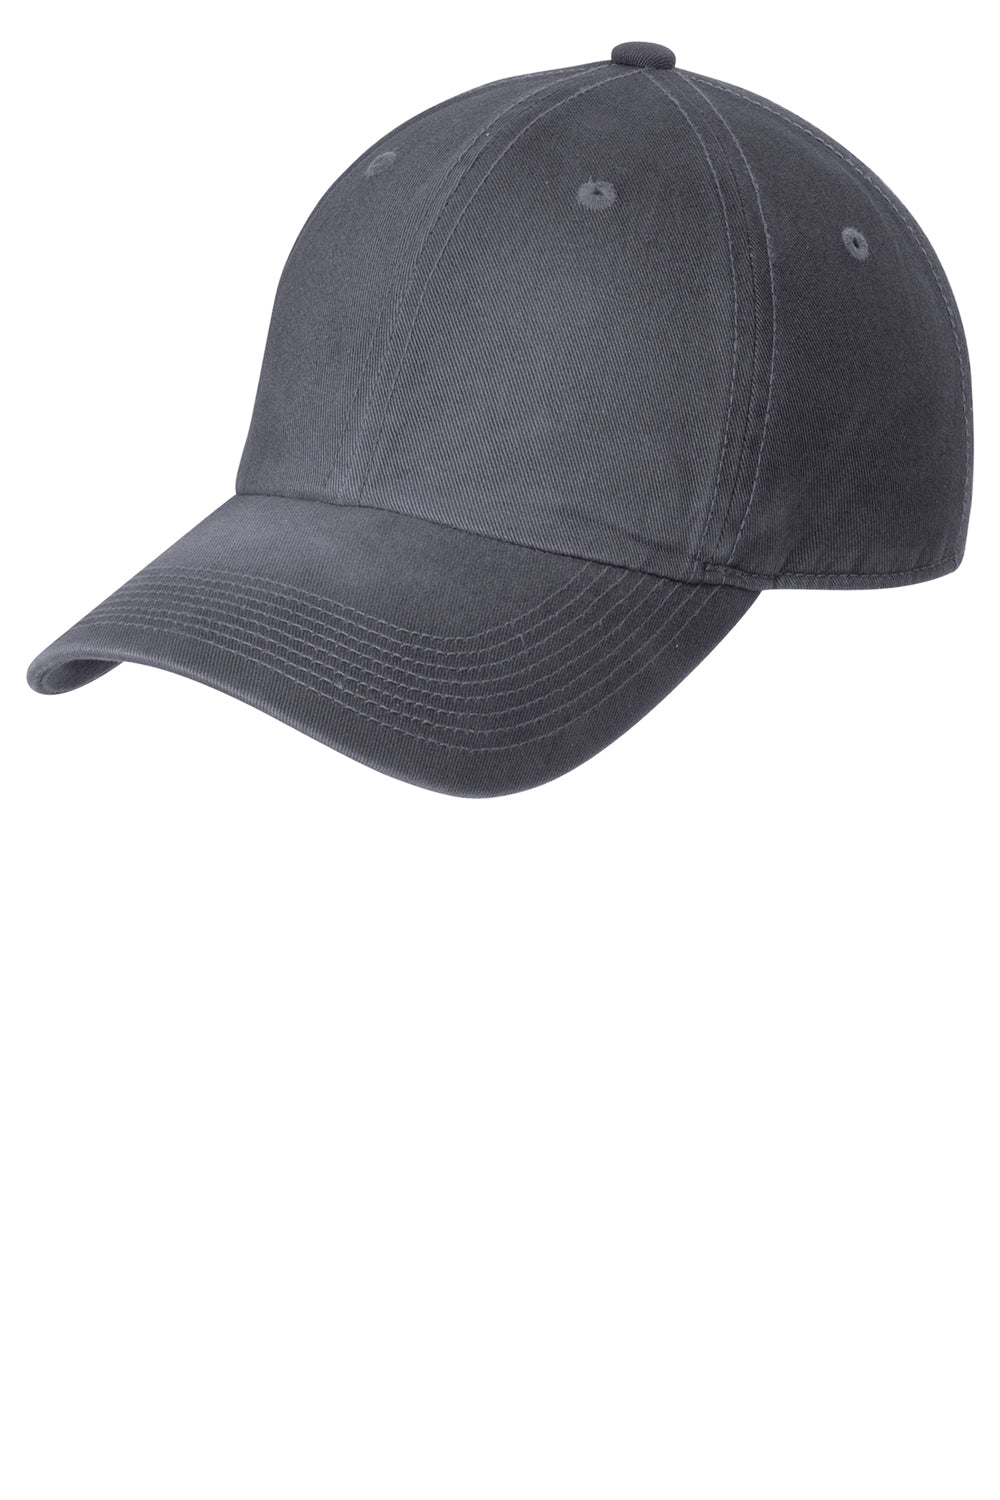 Port Authority C811 Mens Adjustable Hat Charcoal Grey Front